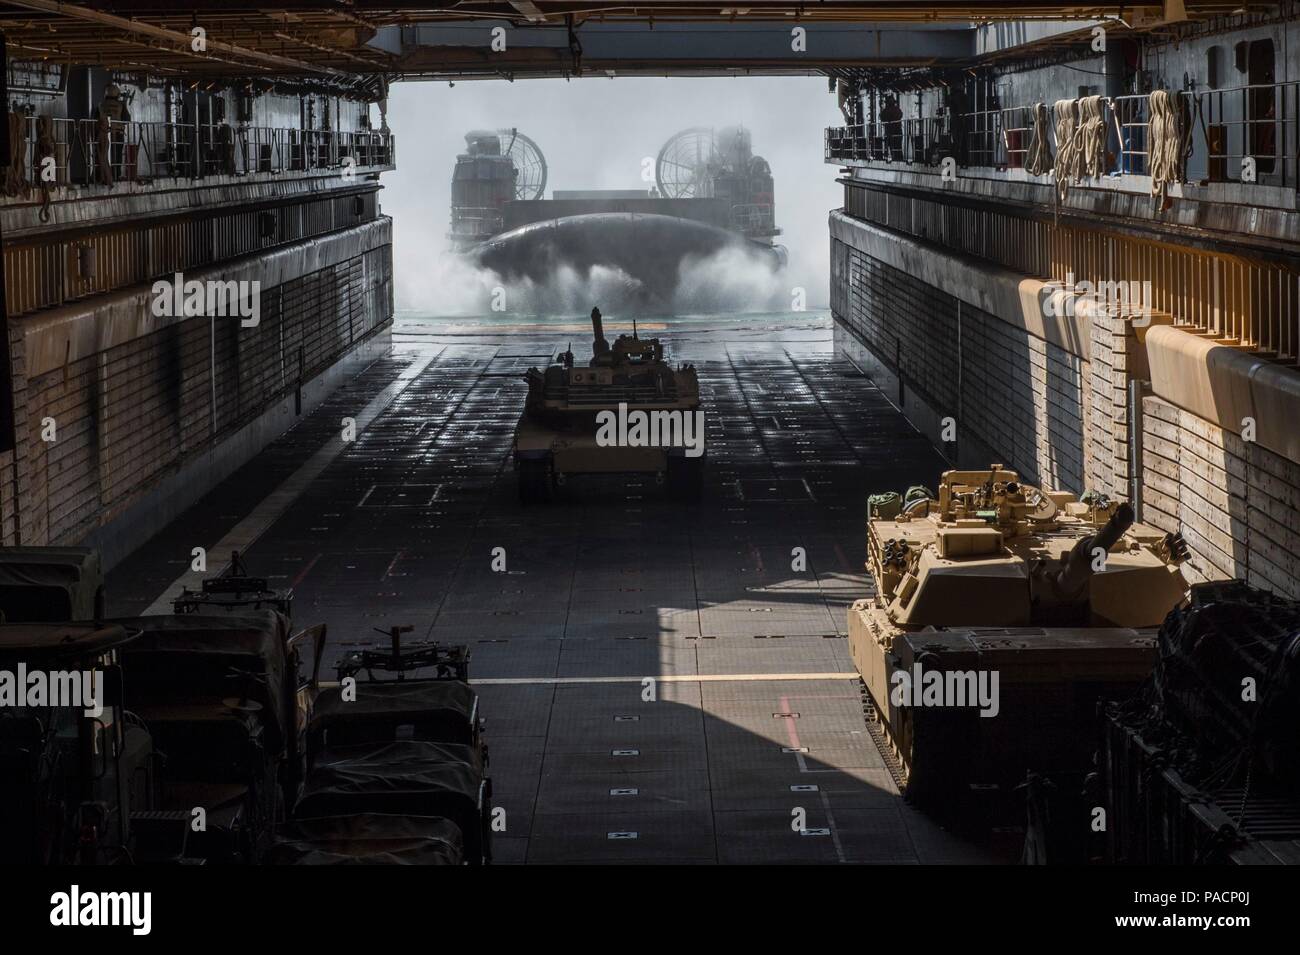 160315-N-RM689-059 EAST SEA (March 15, 2016) - A landing craft air cushion (LCAC) approaches the well deck of amphibious dock landing ship USS Ashland (LSD 48) to load an M1A1 Abram tank attached to Delta Company 1st Tank Battalion, 1st U.S. Marine Division for the Assault Follow-On Echelon (AFOE) portion of Ssang Yong 16. Ashland is assigned to the Bonhomme Richard Expeditionary Strike Group and is participating in Ssang Yong 16, a biennial combined amphibious exercise conducted by forward-deployed U.S. forces with the Republic of Korea navy and Marine Corps, Australian army and Royal New Zea Stock Photo